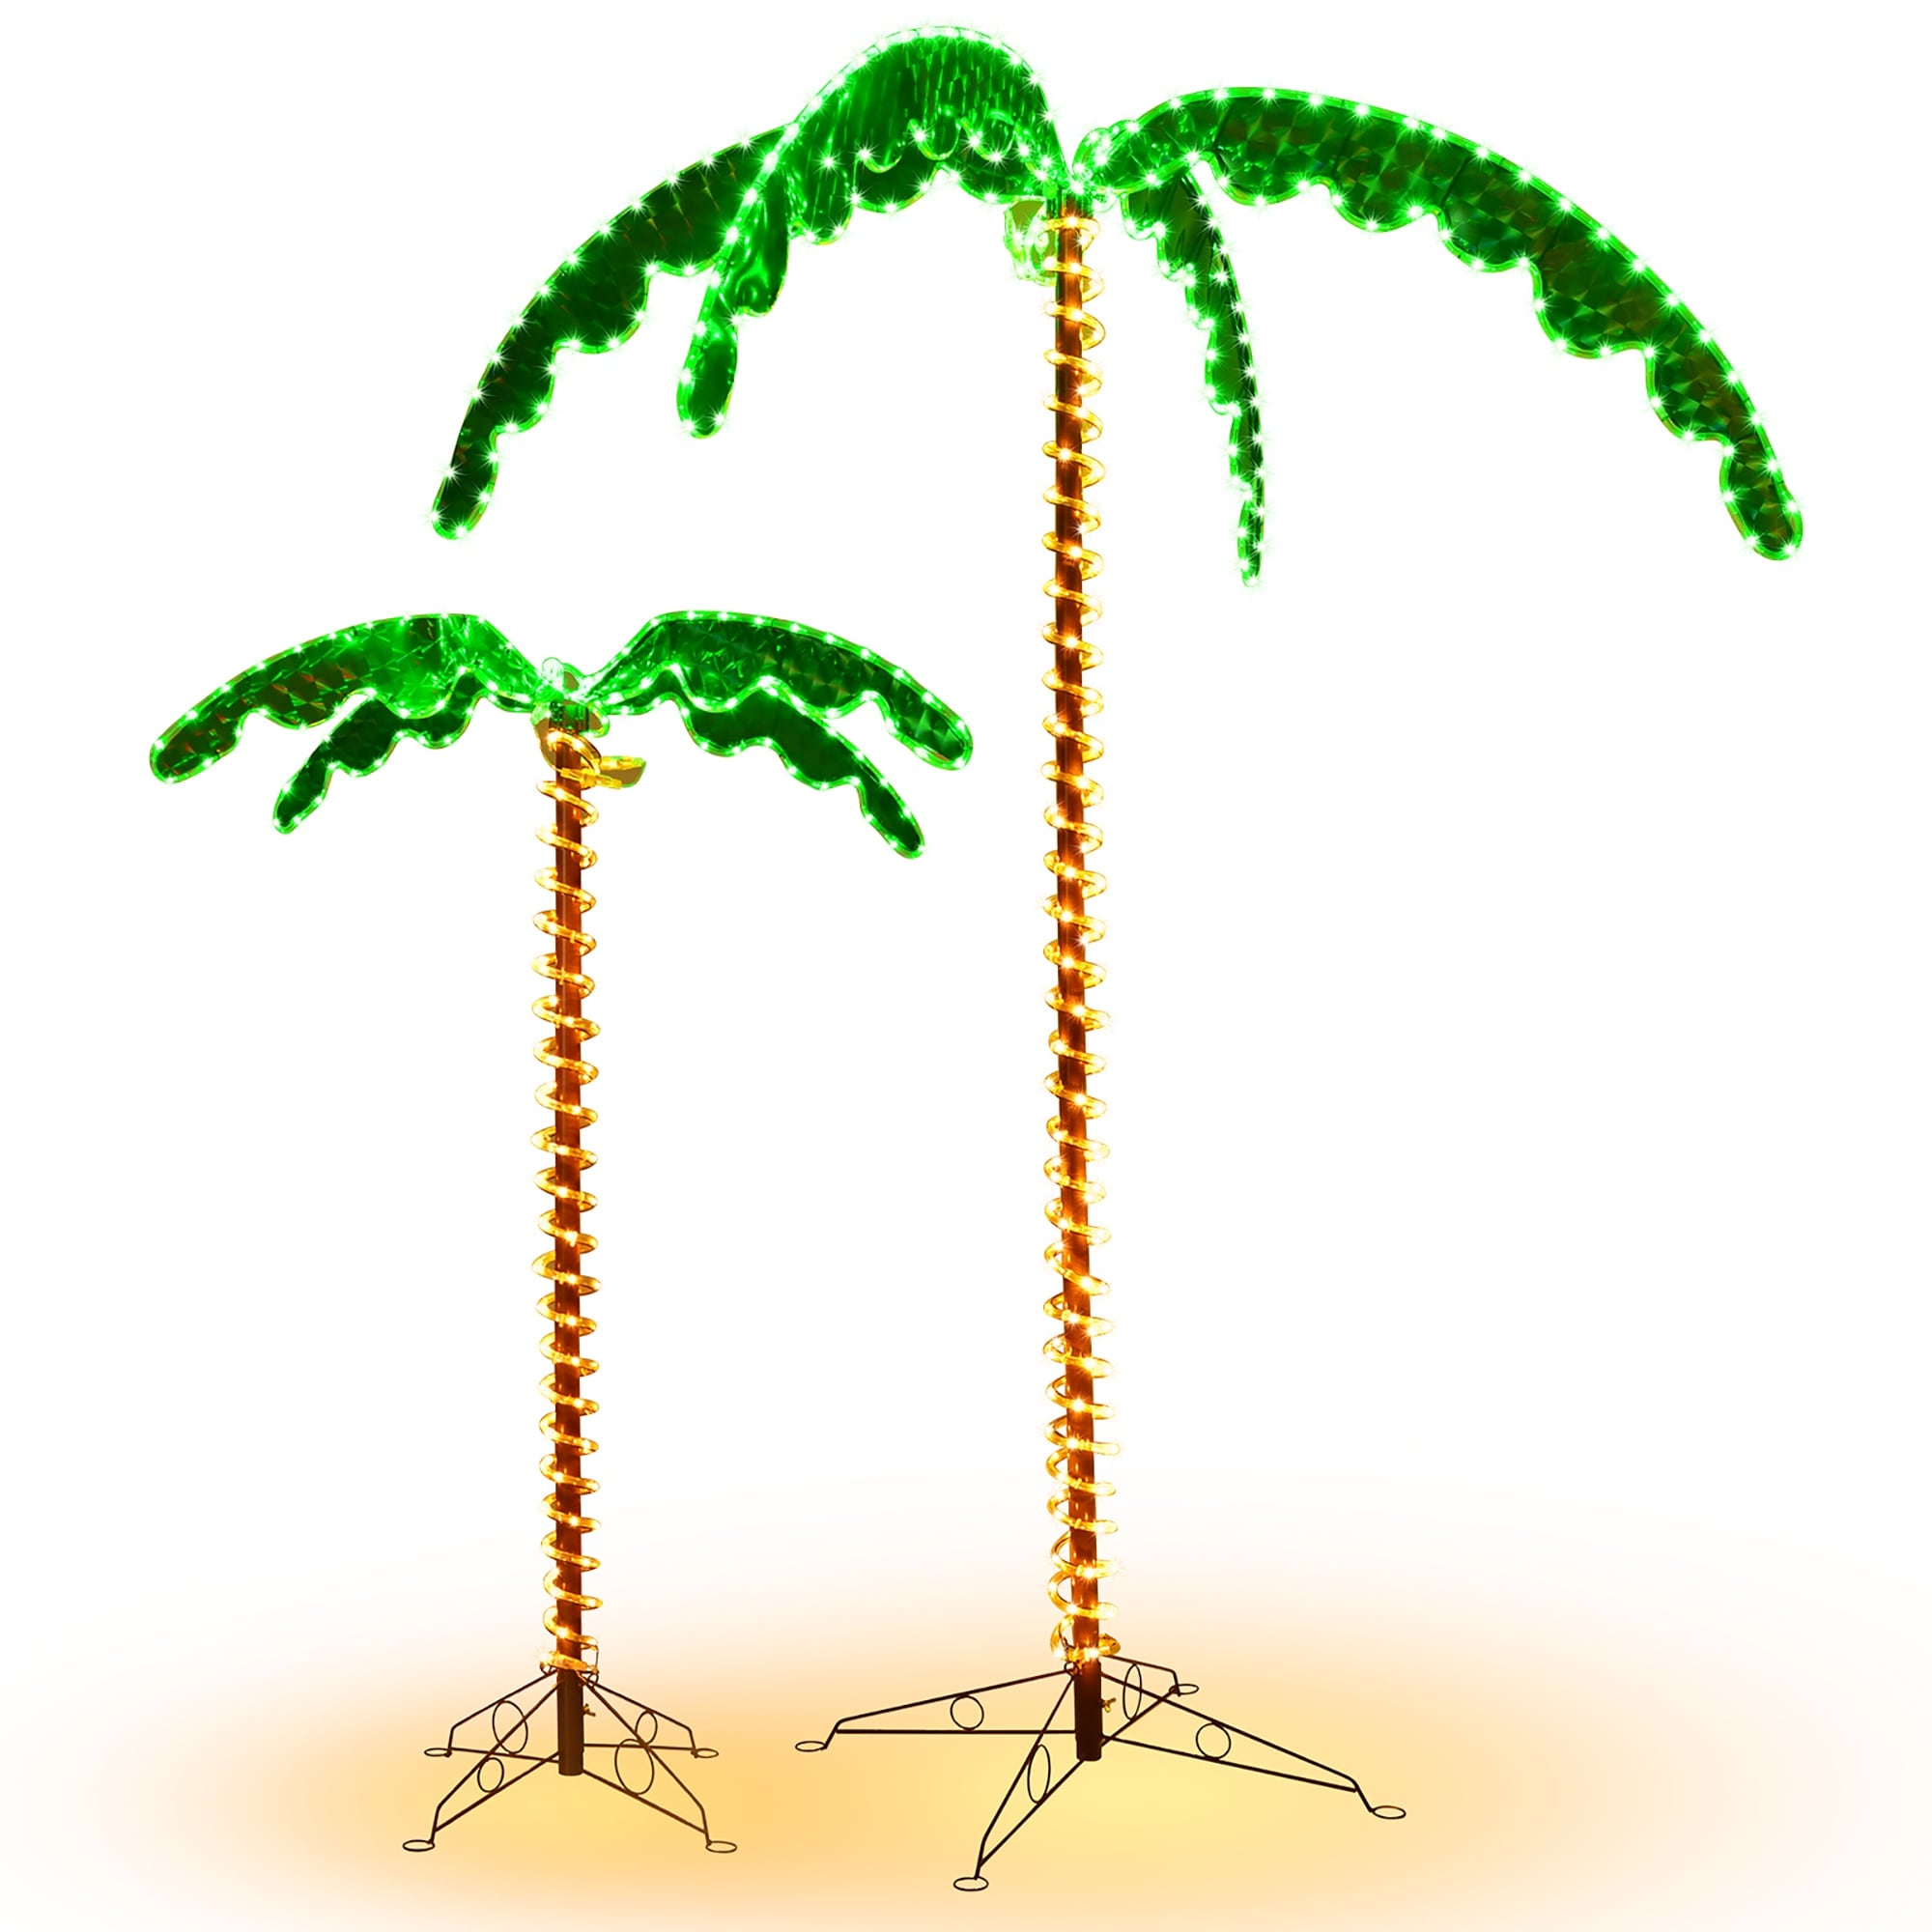 Artificial Lighted Palm Trees Patio Tropical Light Up Palm Tree On Sale  Bed Bath  Beyond 36757403